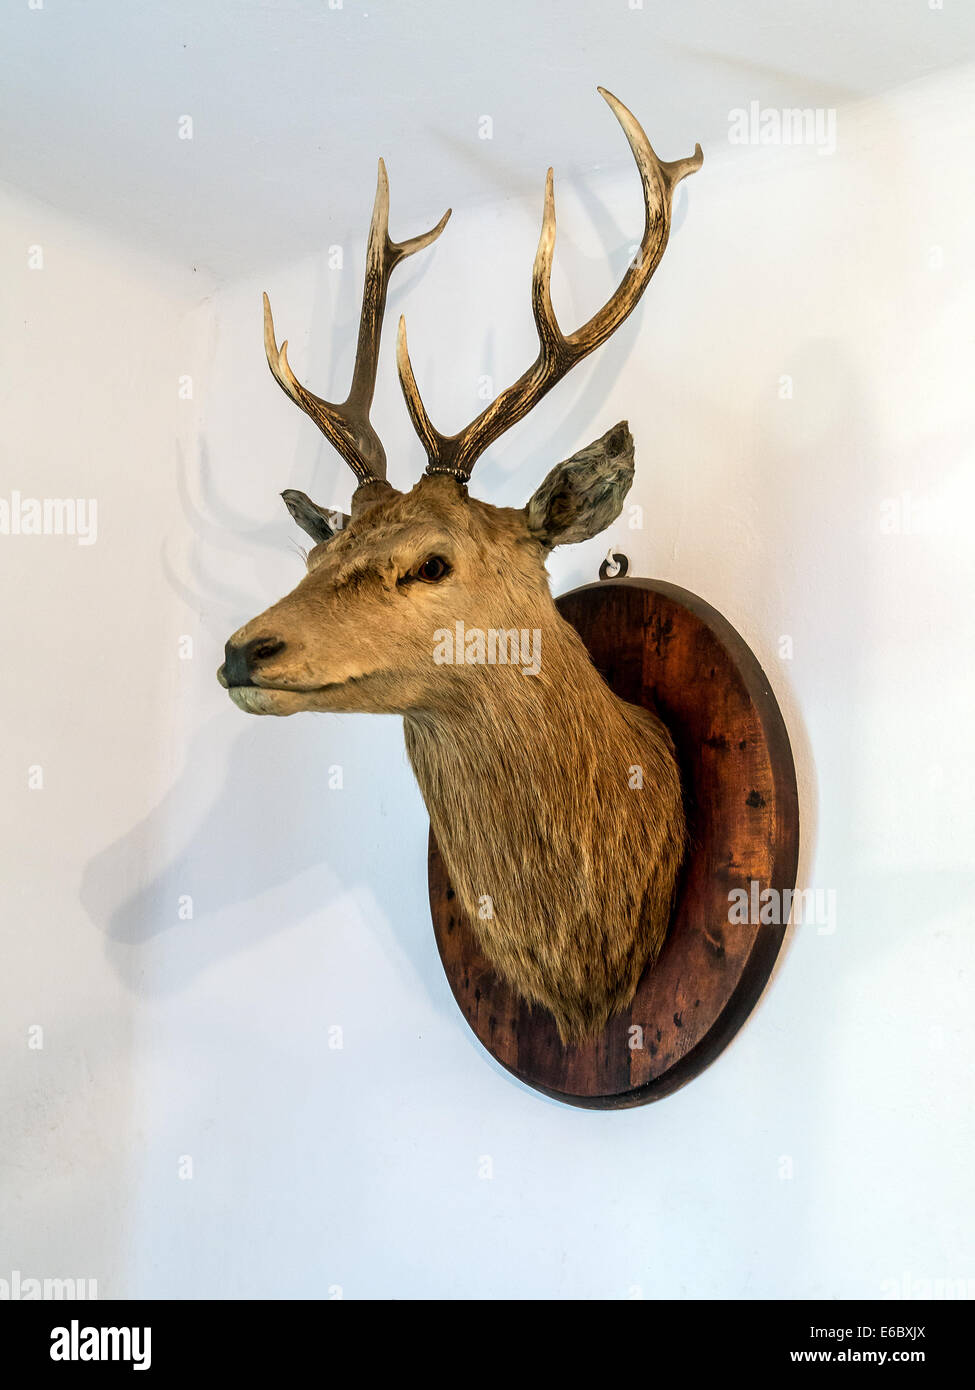 Deer antlers hanging on white wall Stock Photo